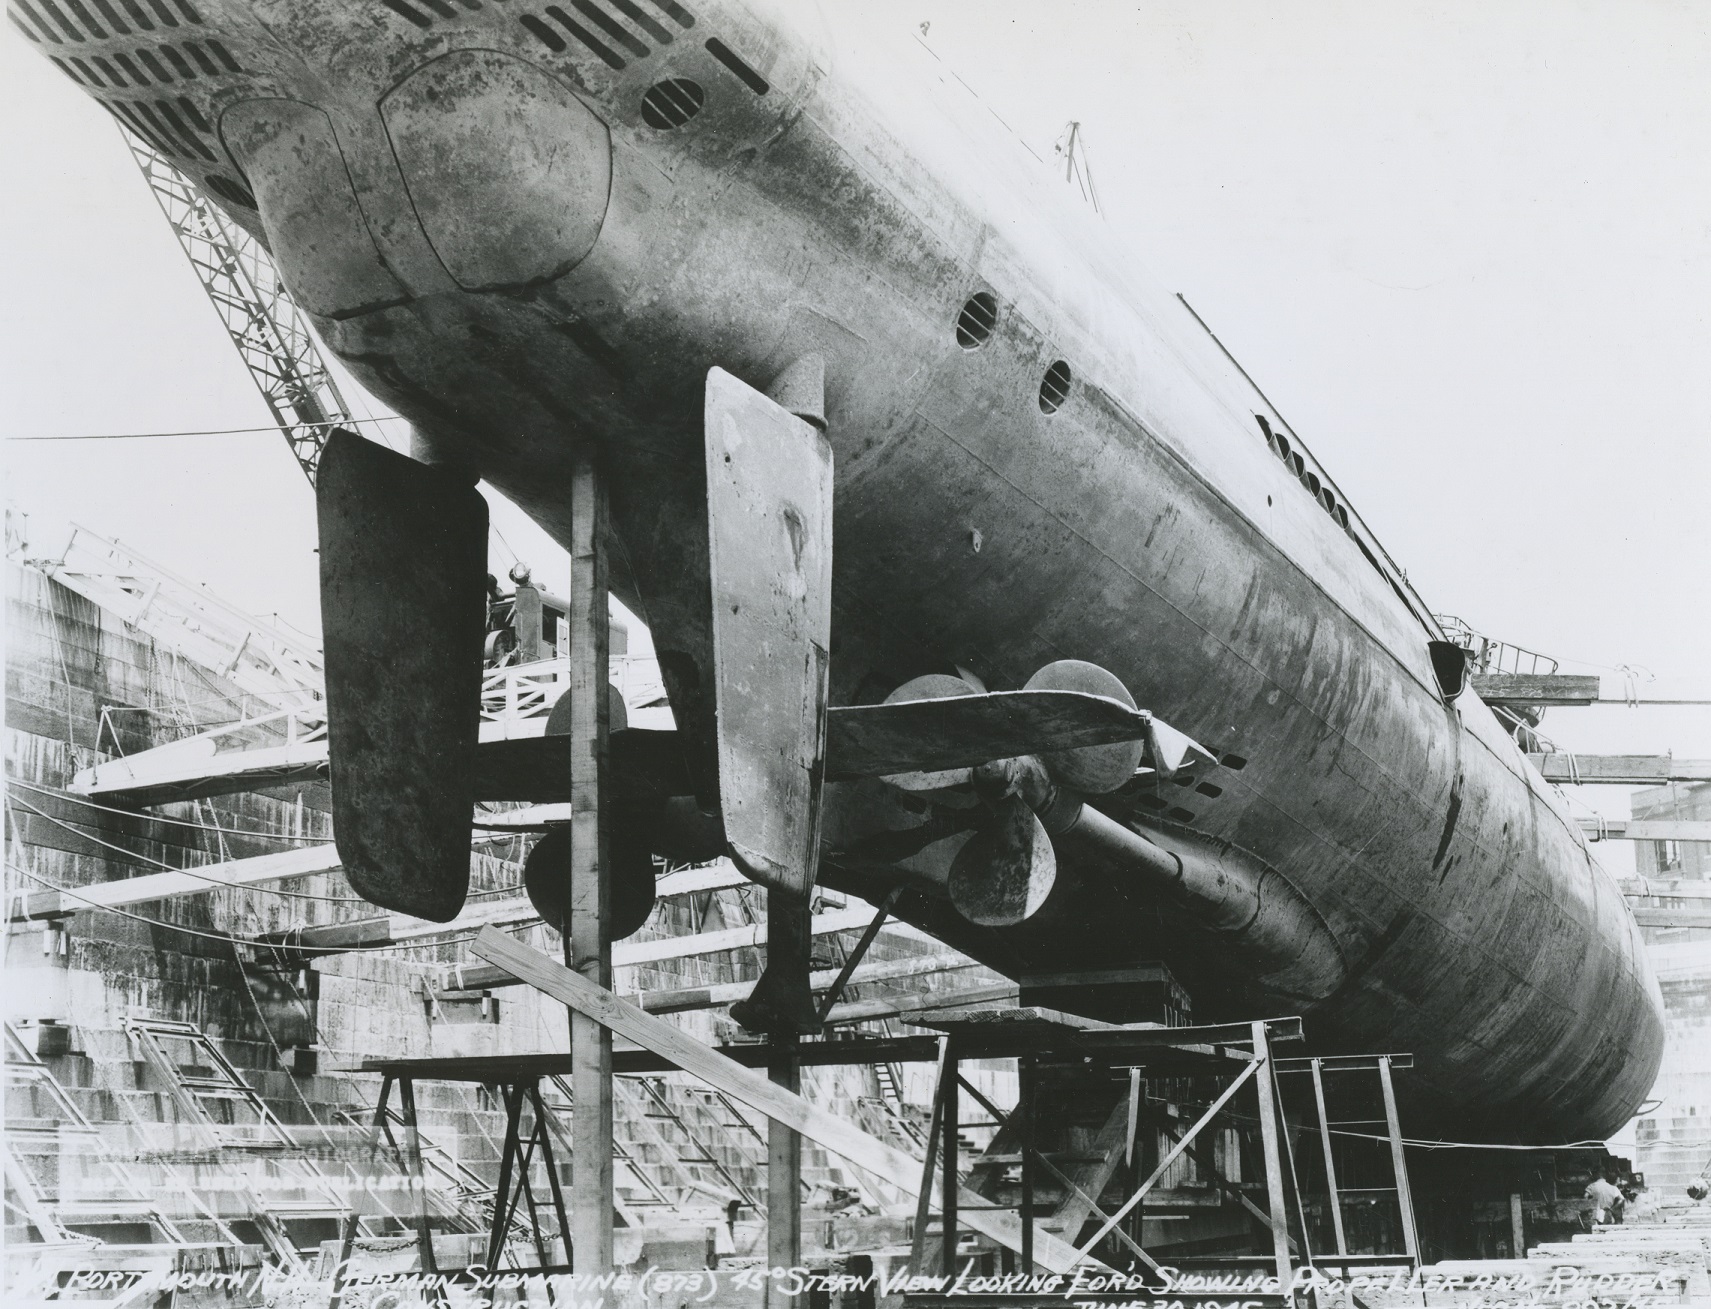 3.	German submarine U-873 in dry dock at Portsmouth Naval Shipyard after Durant accepted its surrender and ushered it into captivity. (navsource.org)